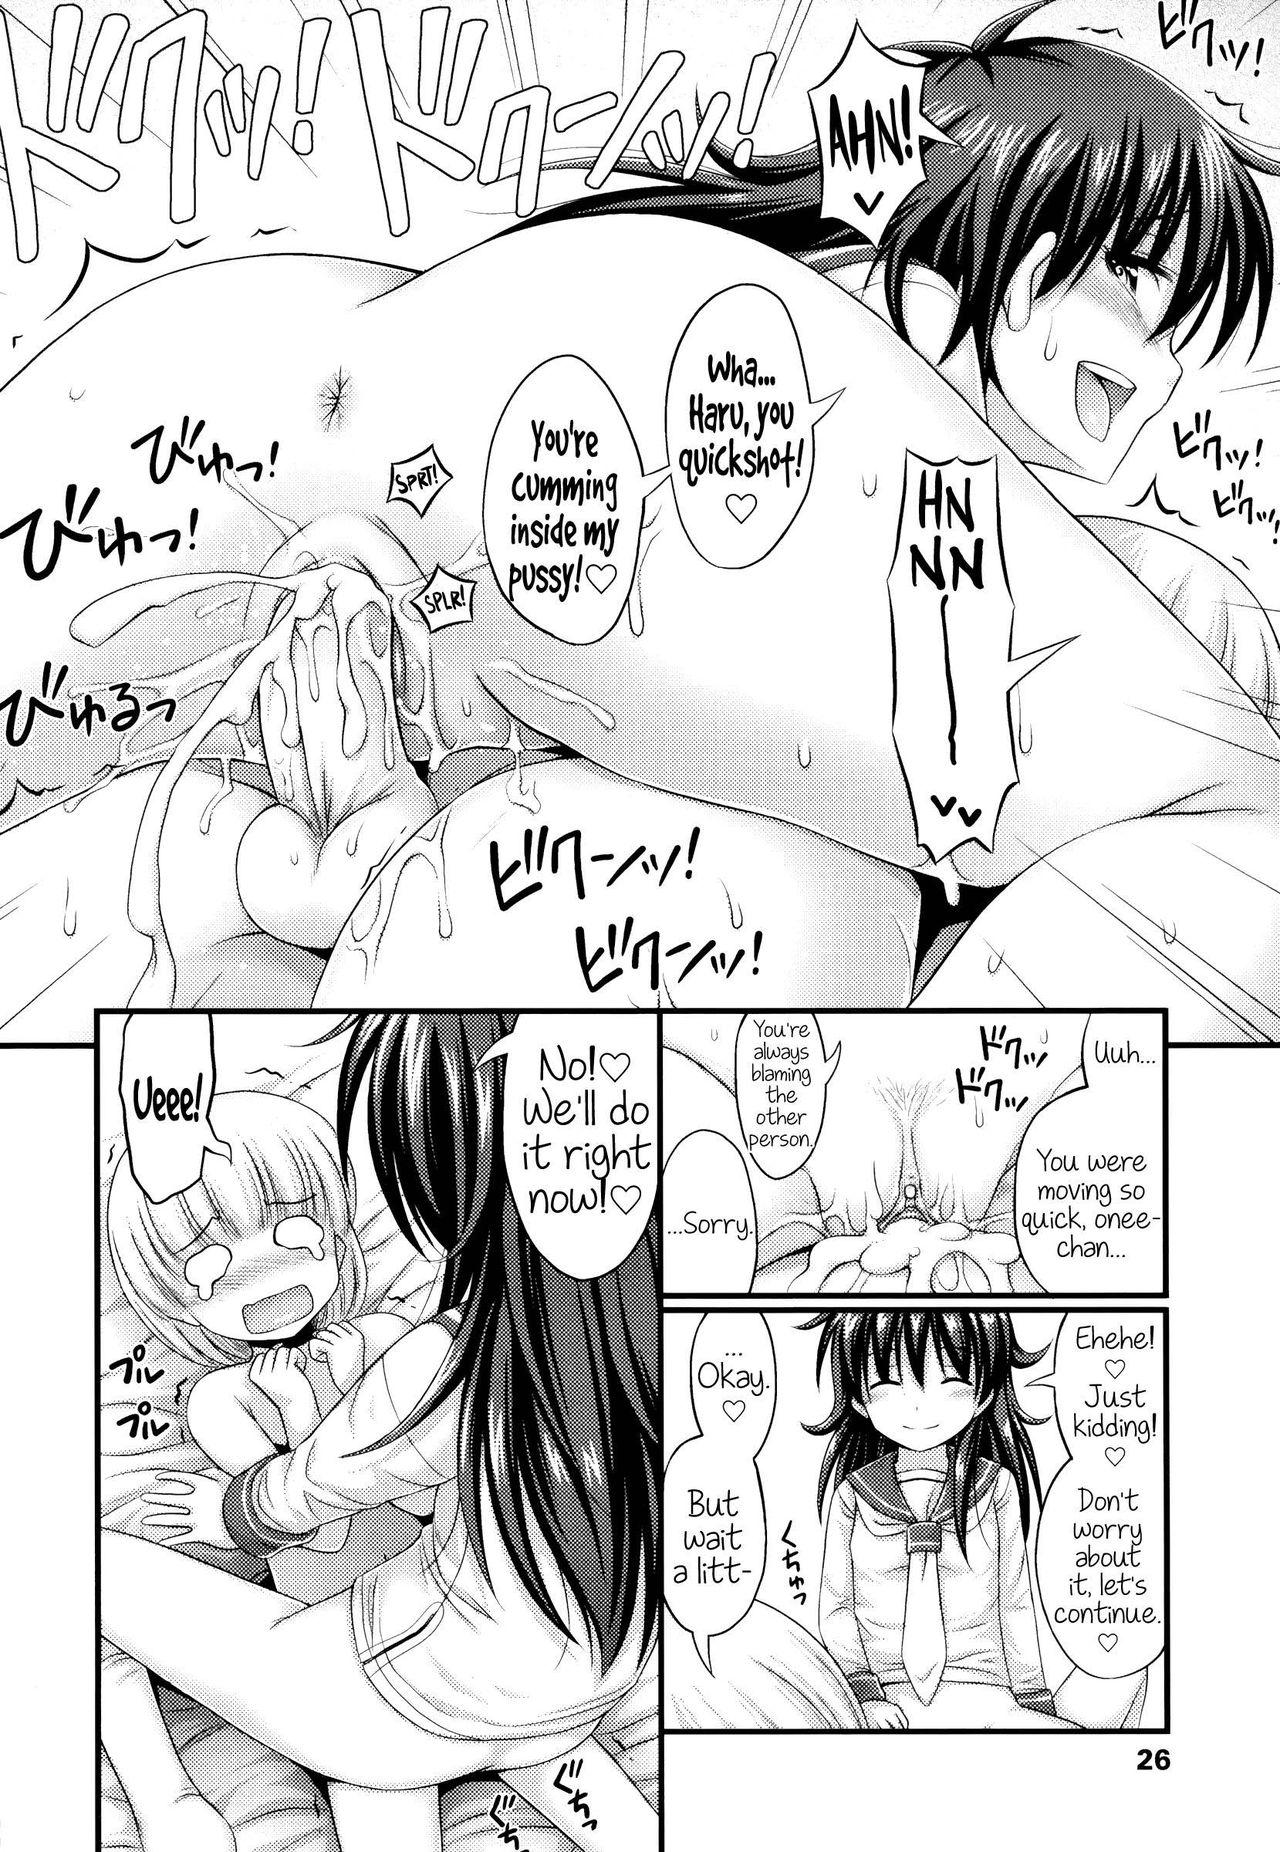 Style Otouto mo Kawaii | My brother is cute too Hooker - Page 10